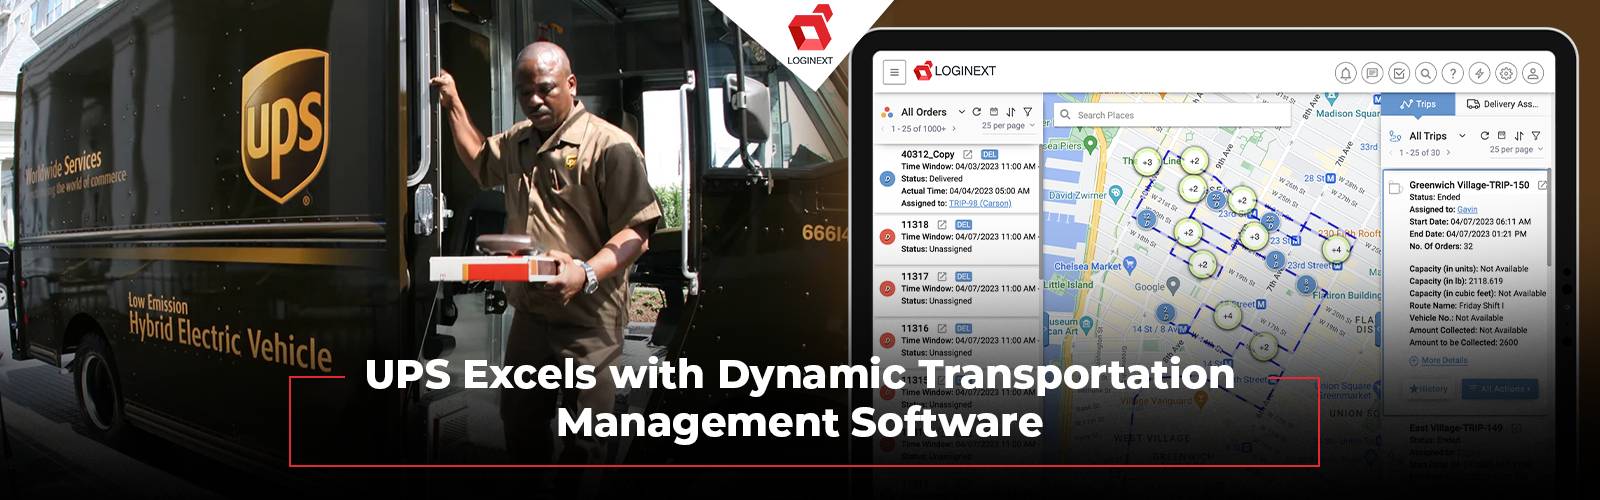 Transportation Management Software Used by UPS